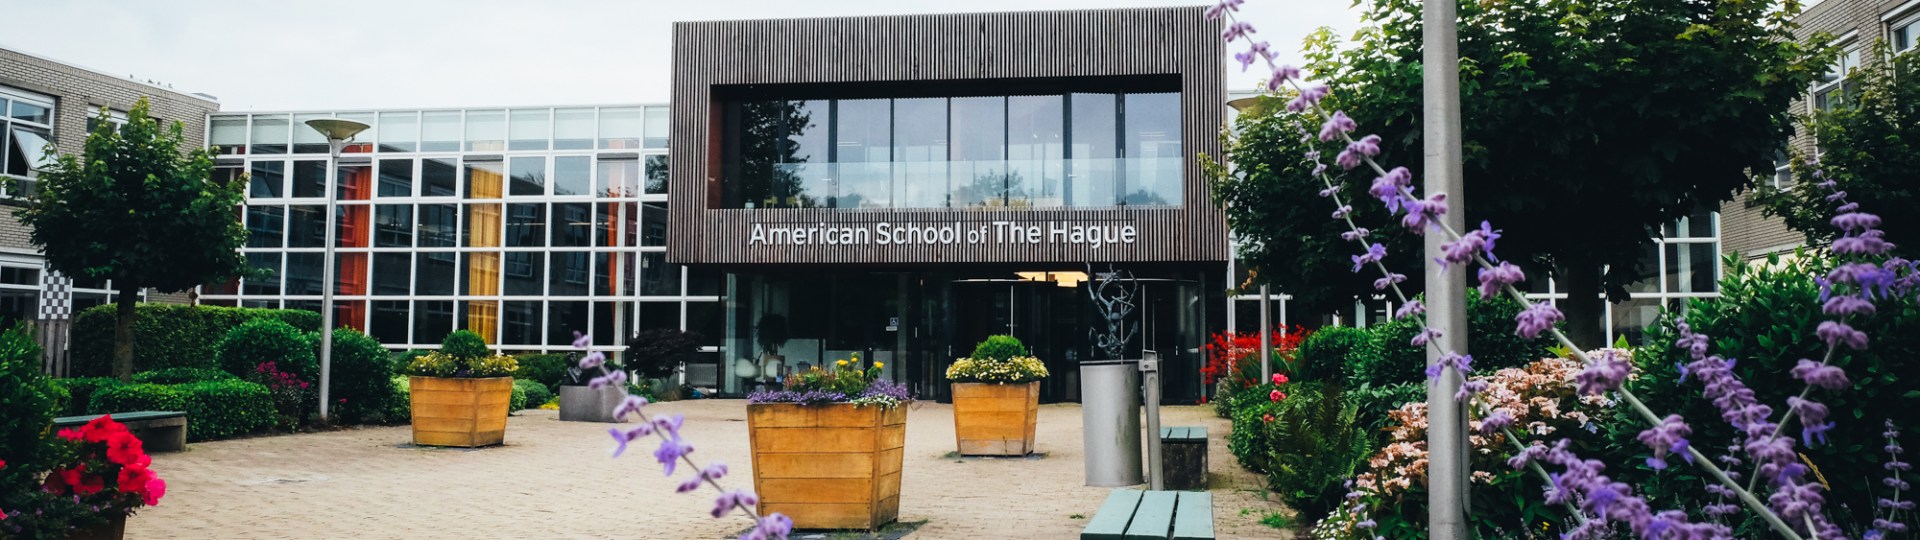 American School of The Hague Business Office